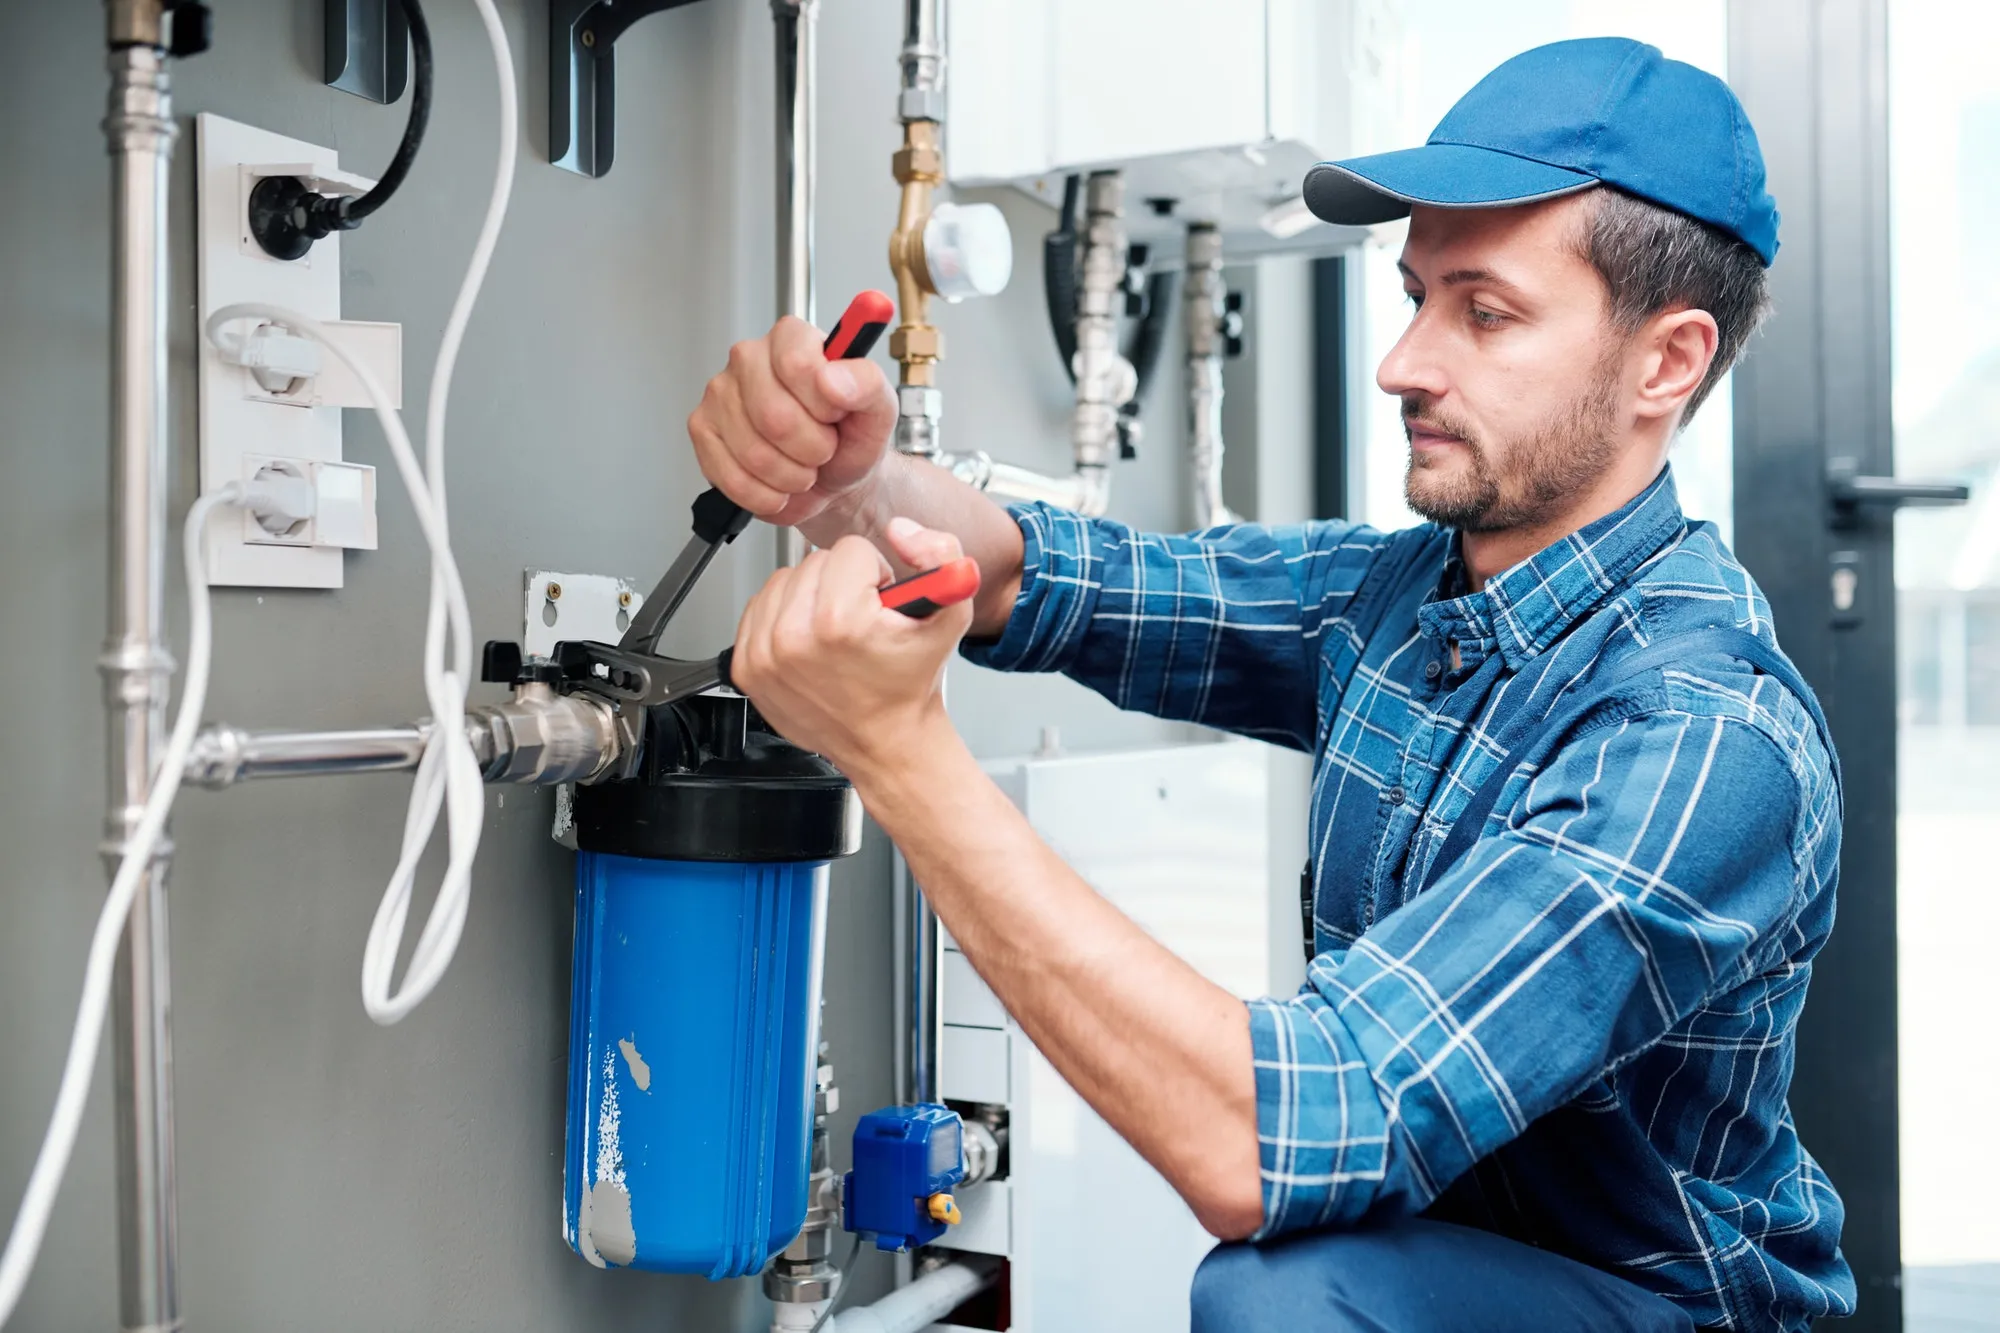 Plumbing Experts In Mableton, GA | Call Us Today